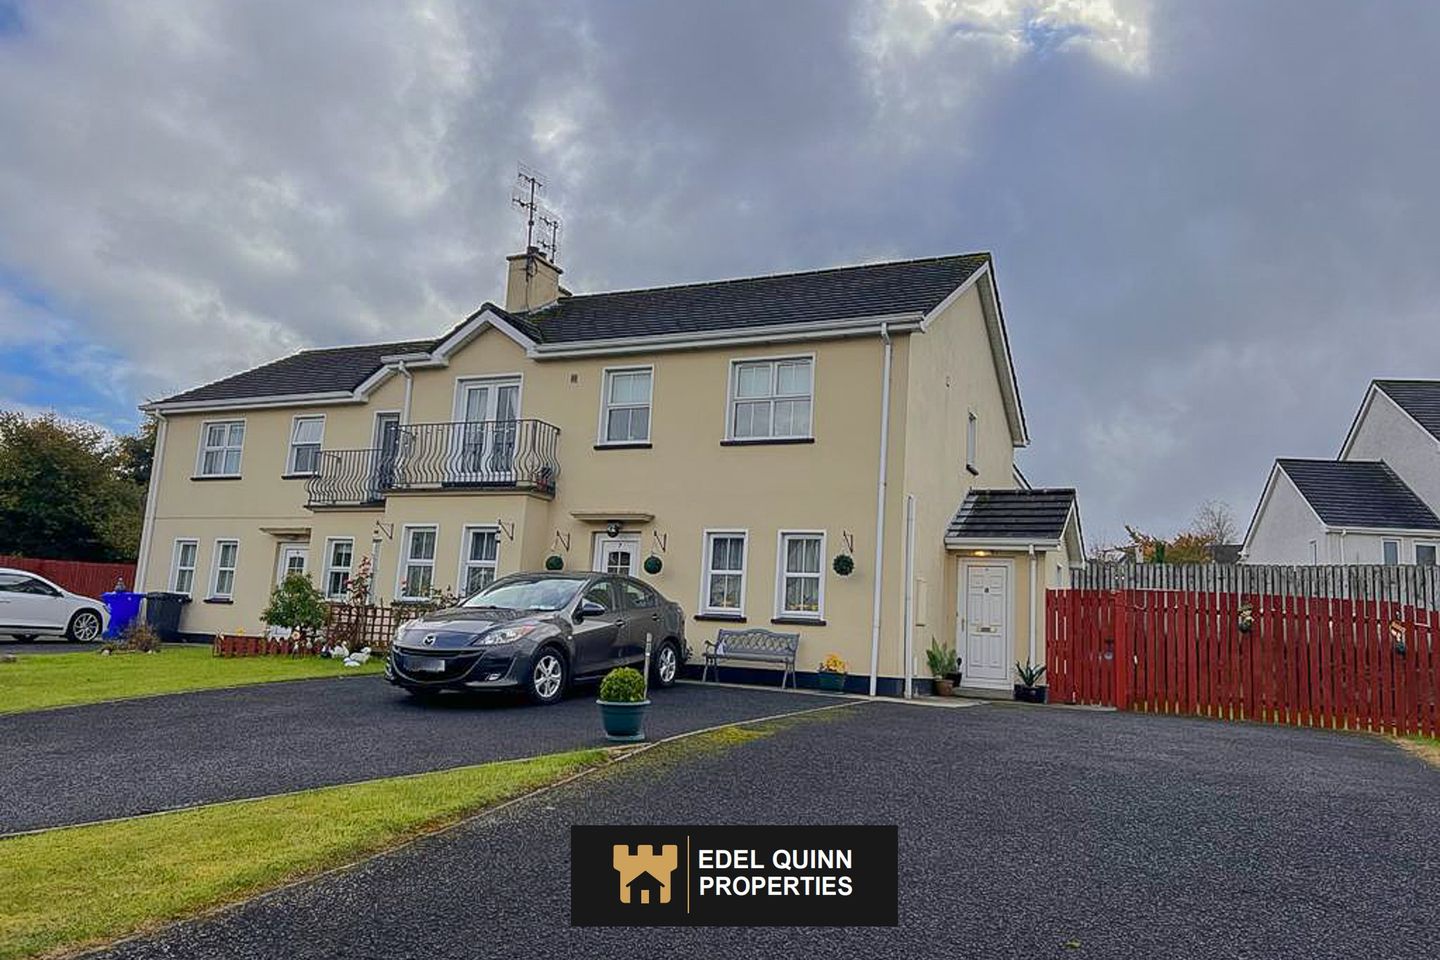 Apartment 8, The Beeches, Ballybofey, Co. Donegal, F93C580